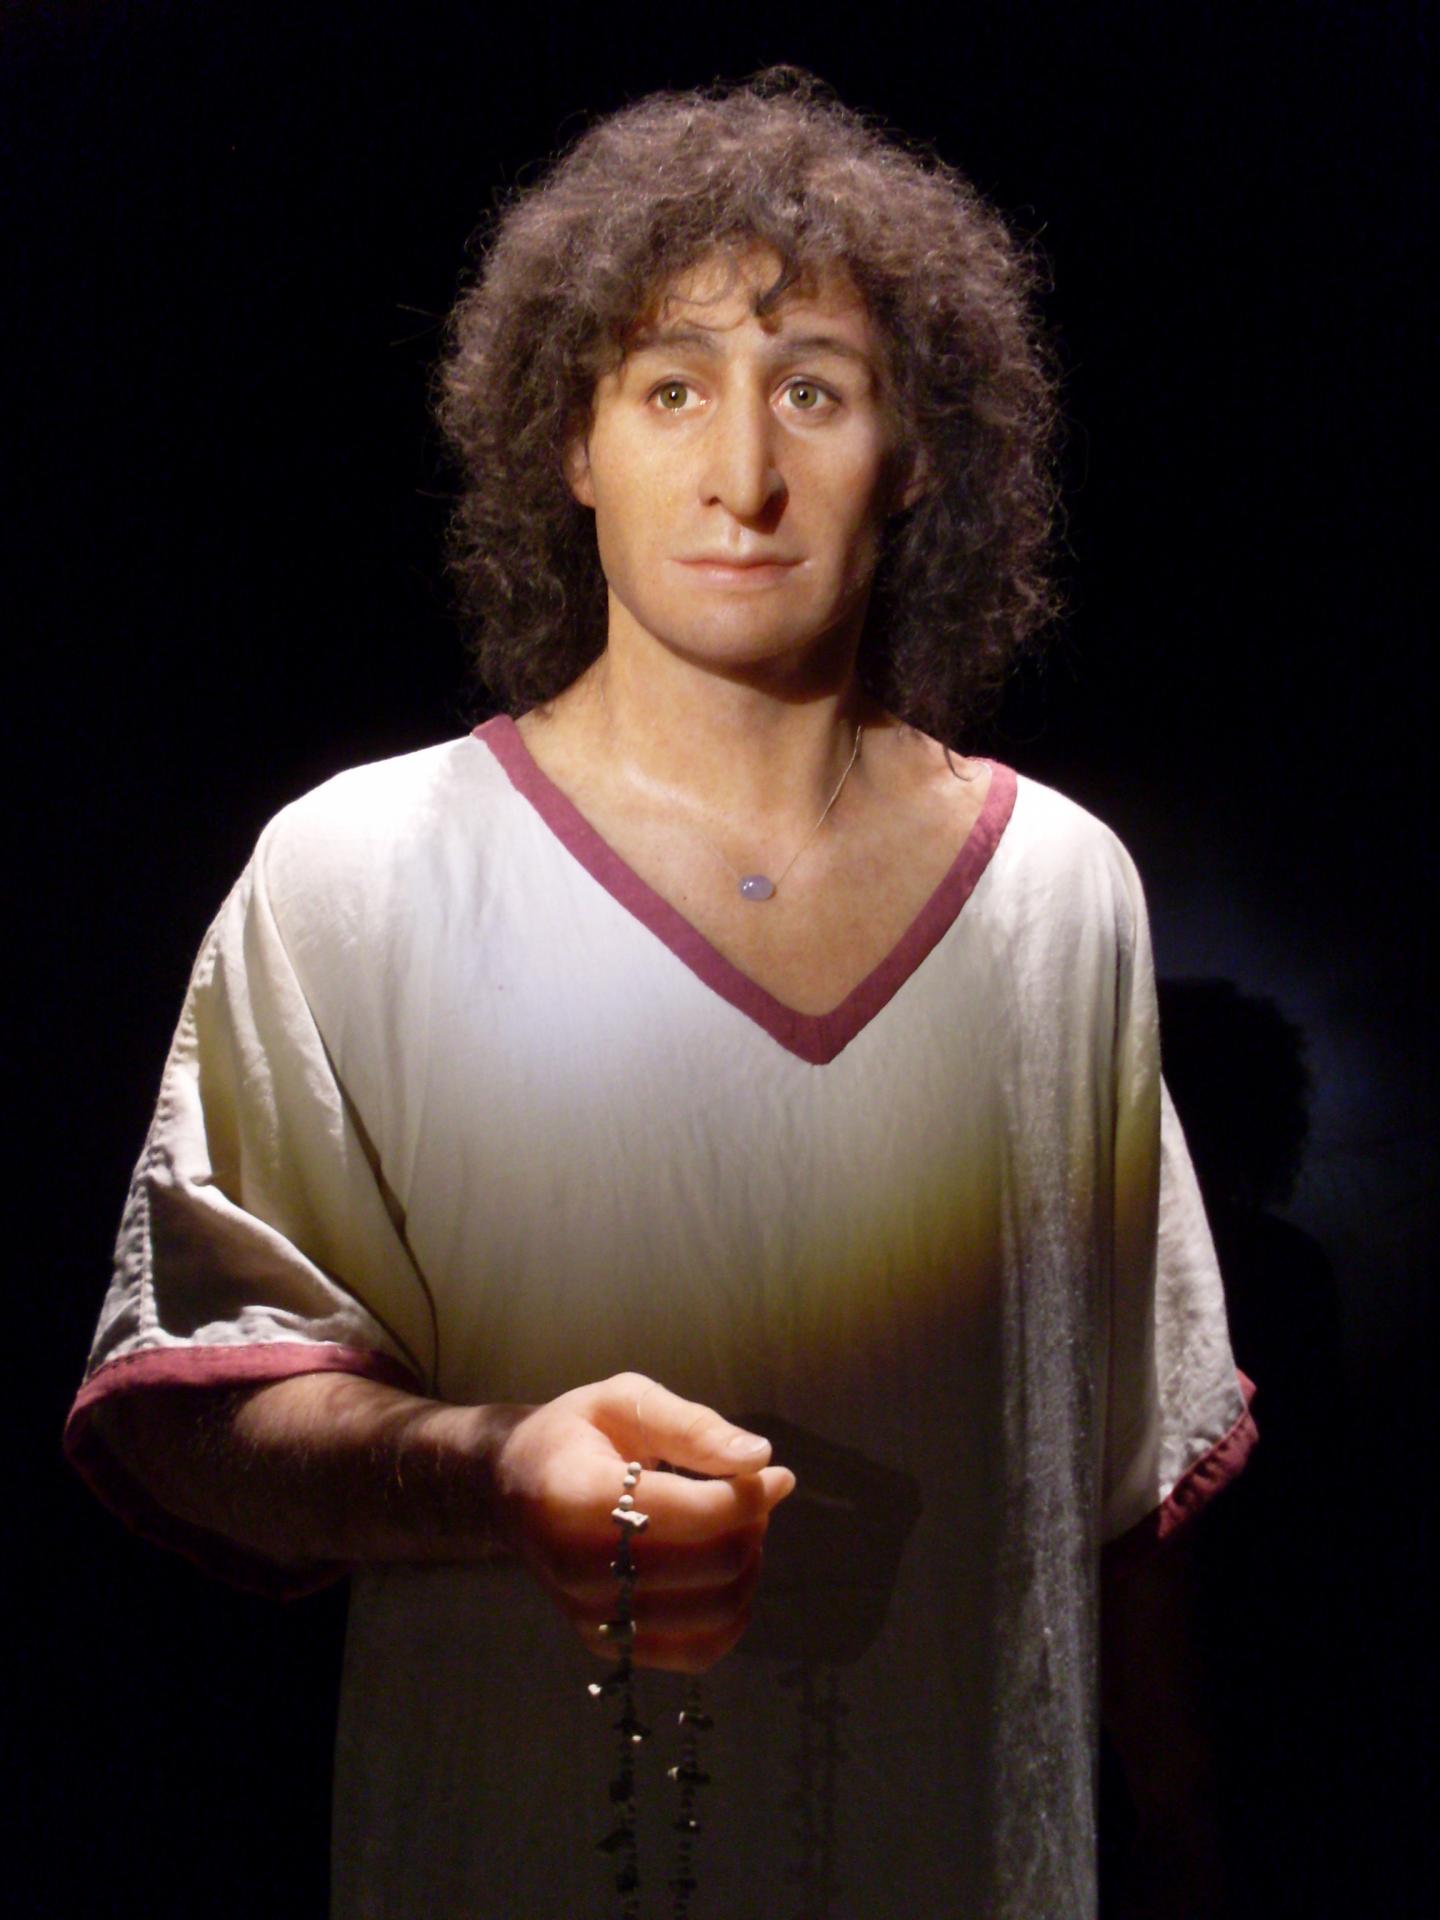 A 2,500-Year-Old Phoenician Dubbed the 'Young Man of Byrsa' or 'Ariche'